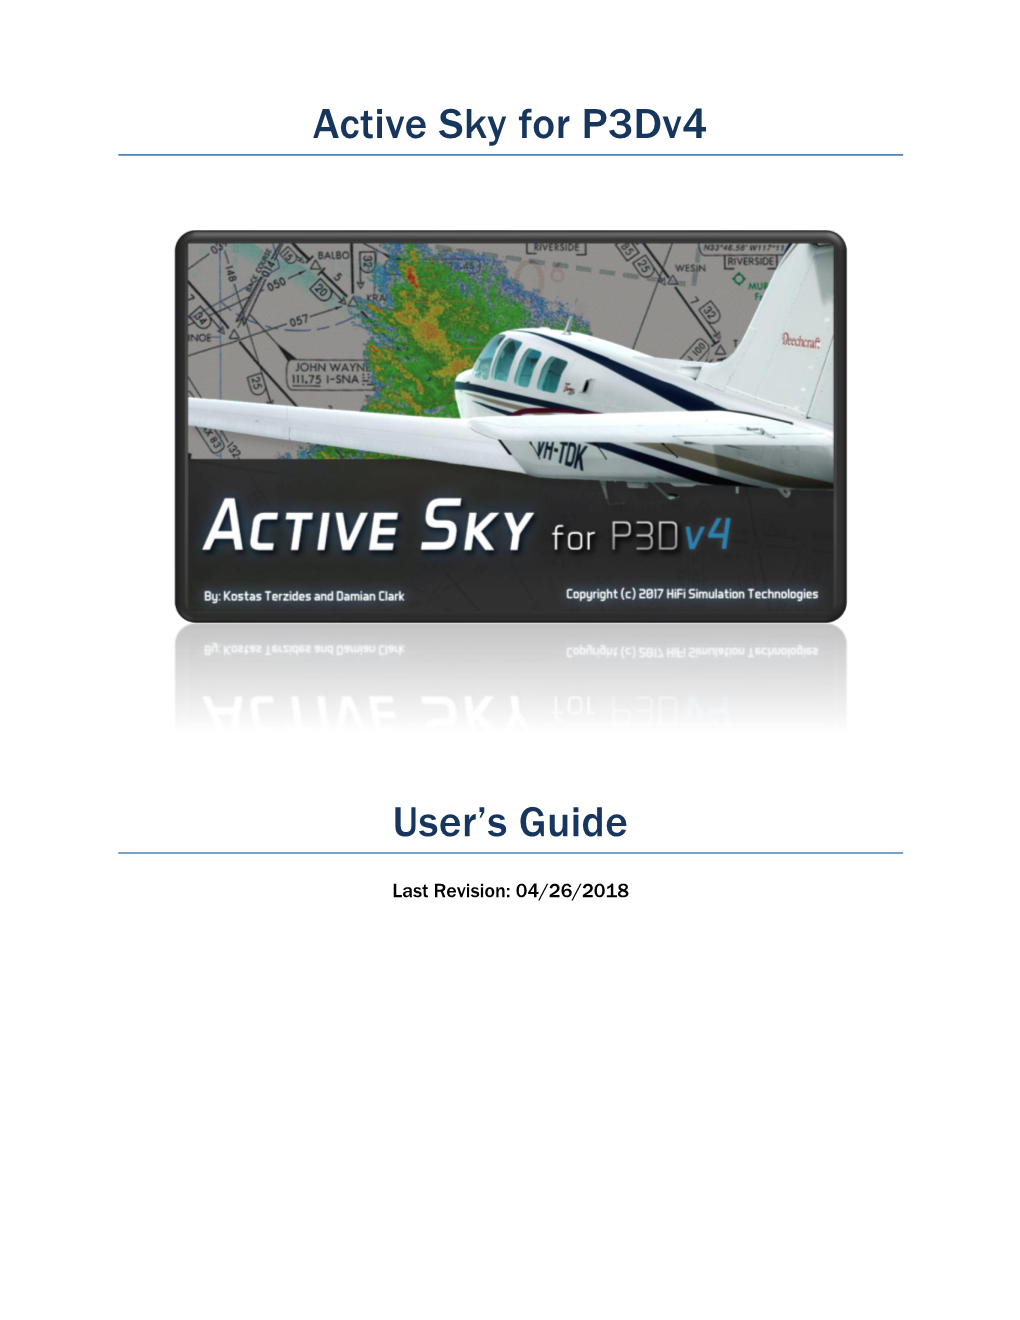 Active Sky for P3dv4 User's Guide